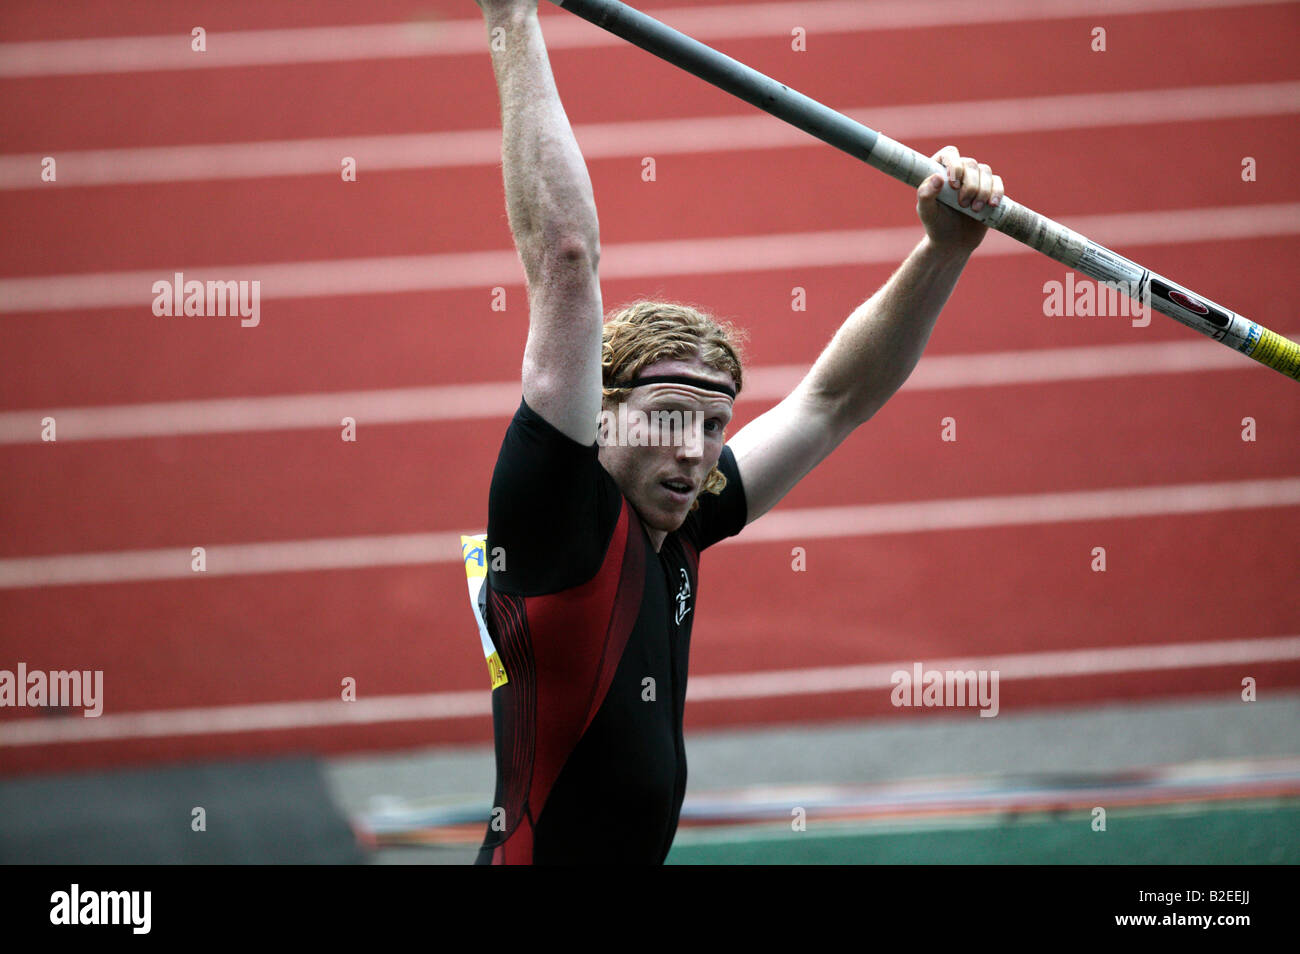 Steve Hooker poses trackside after completing a vault in the Aviva London Grand Prix mens pole vault competition Stock Photo